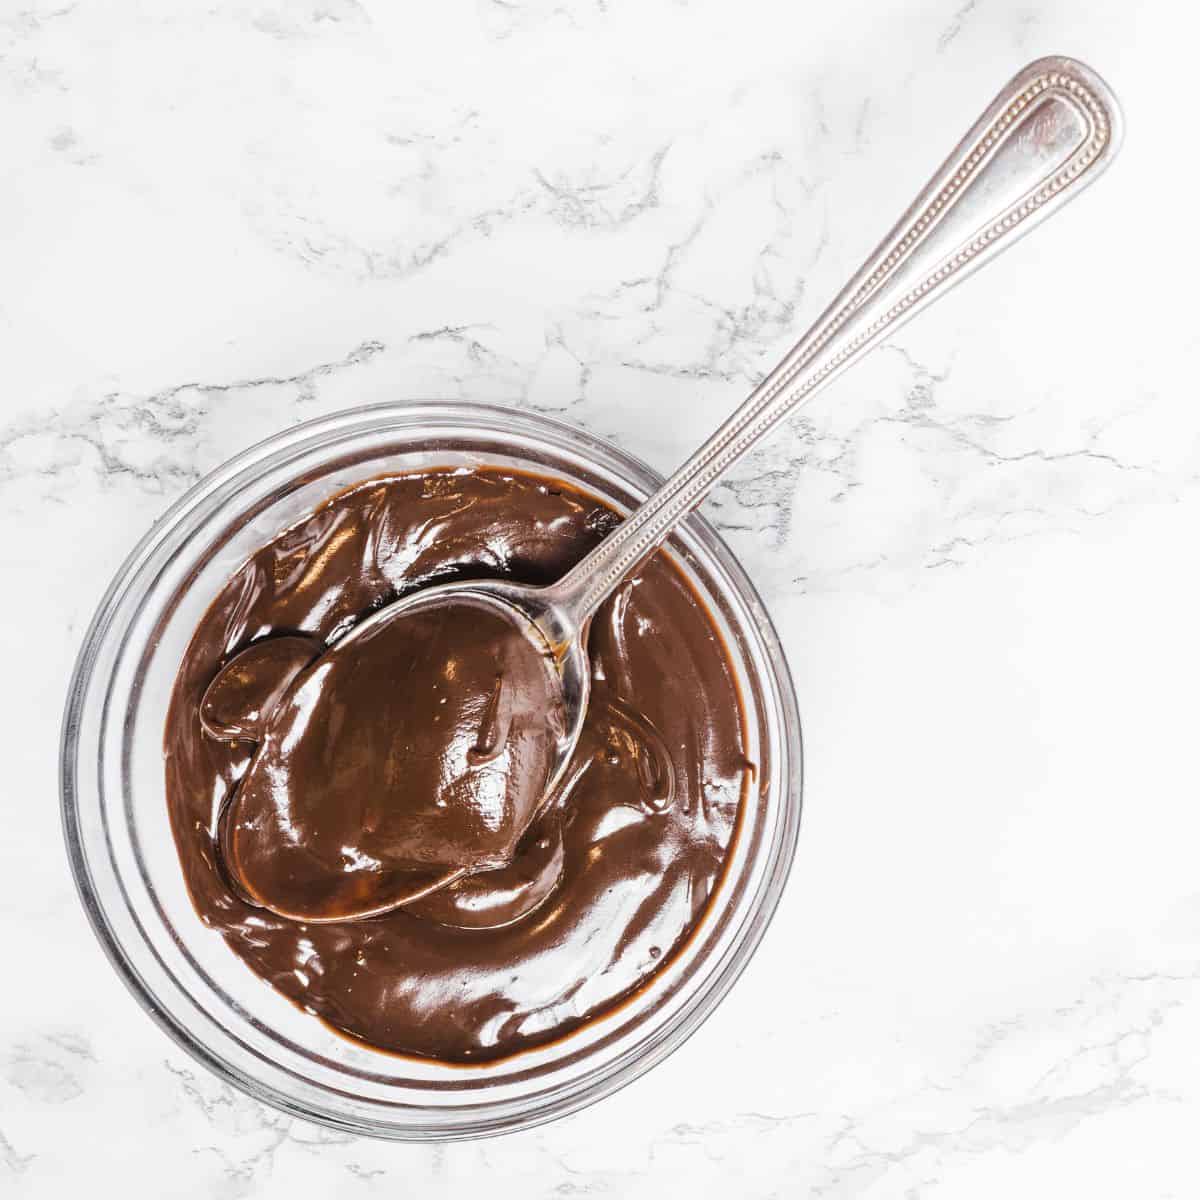 Healthy chocolate protein pudding in a cup with a spoon.